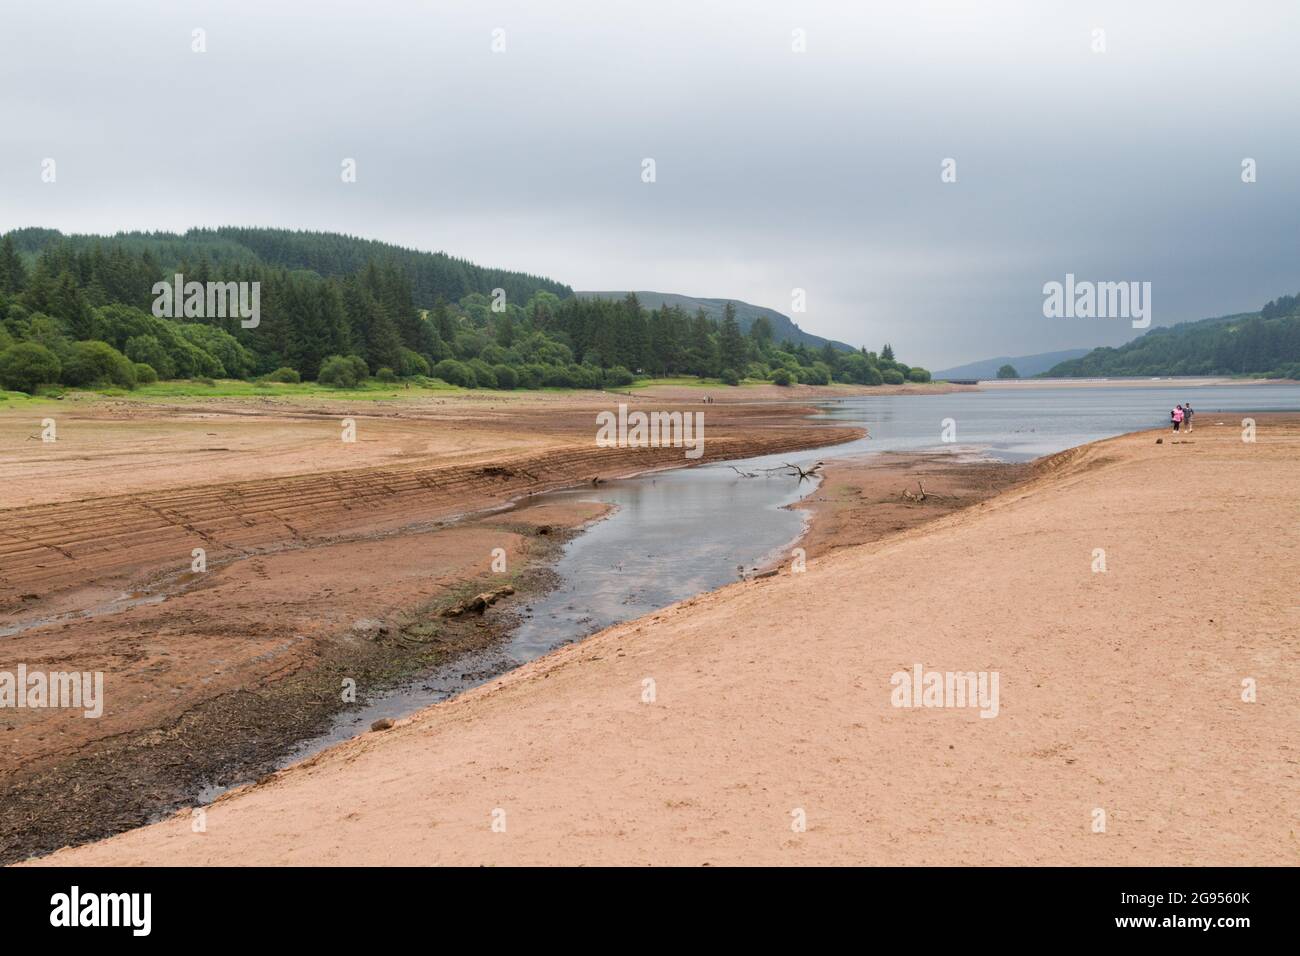 UK weather: Llwyn Onn reservoir, Merthyr Tydfil, South Wales.  24 July 2021.  Water levels continue to deplete after the heatwave.  Credit: Andrew Bartlett/Alamy Live News. Stock Photo